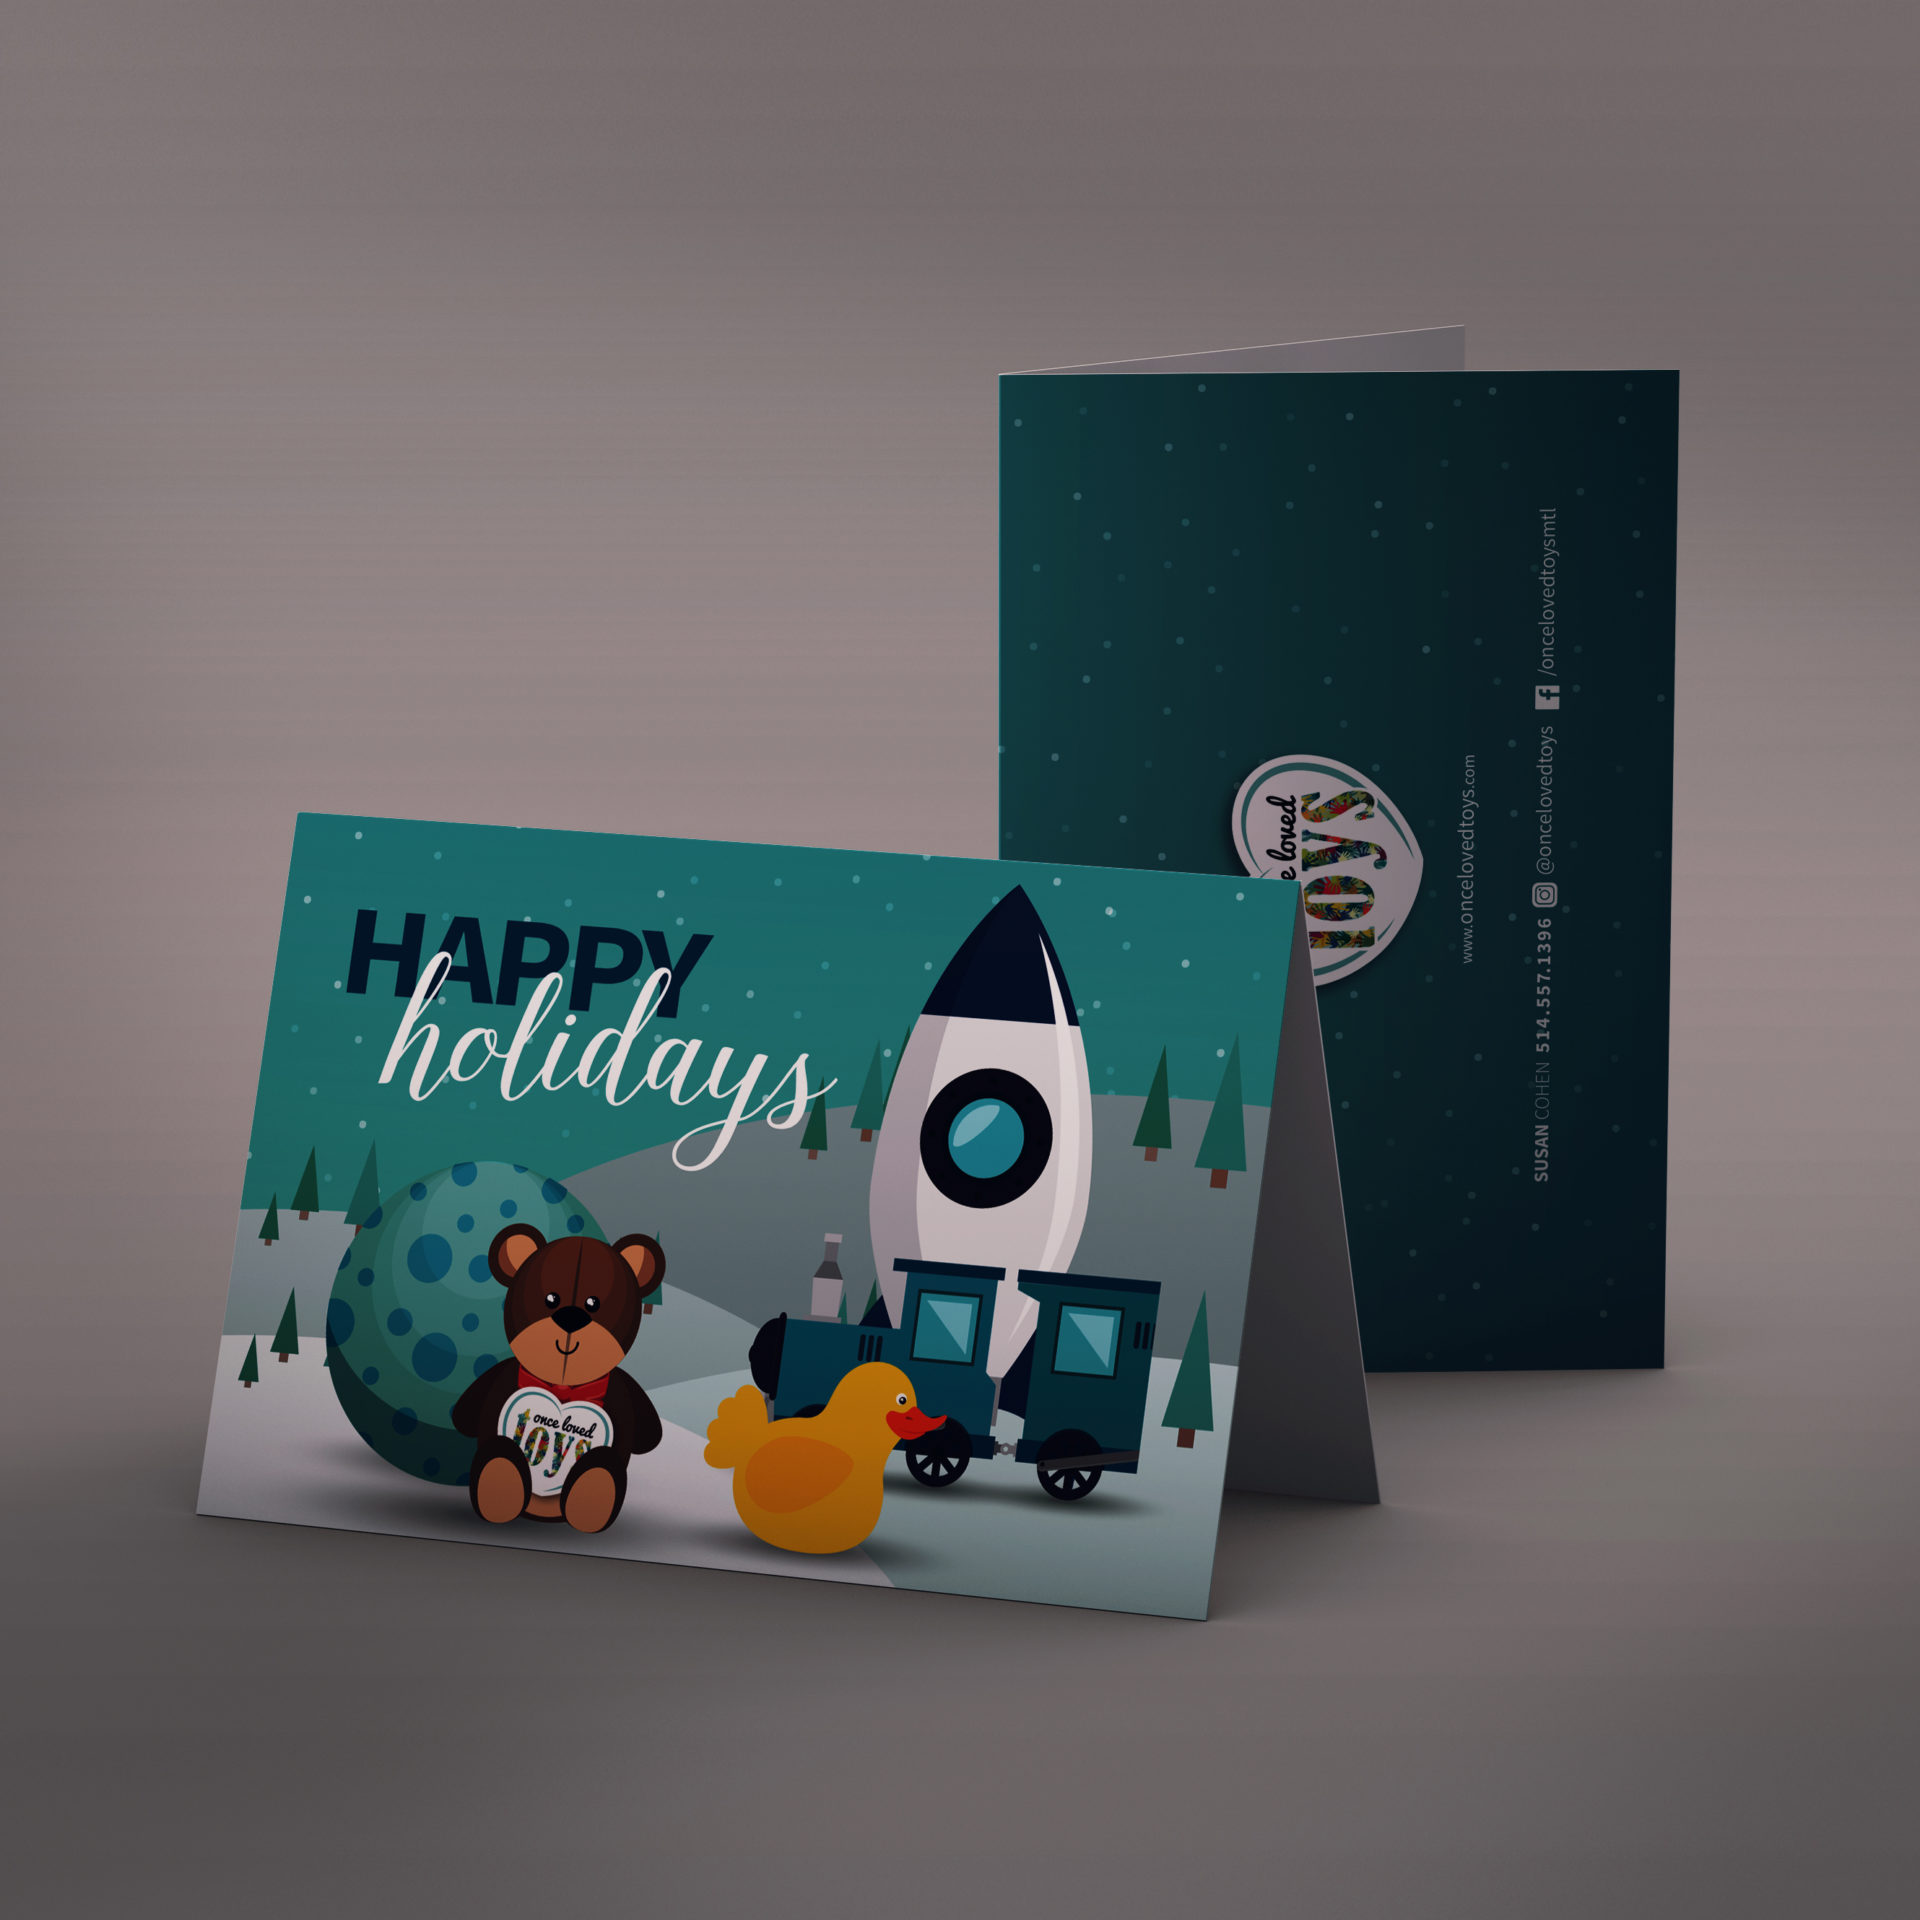 Holiday greeting card with illustration of toys (Rubber ducky, stuffed animal, wagon) in the snow with the words 'Happy Holidays'.